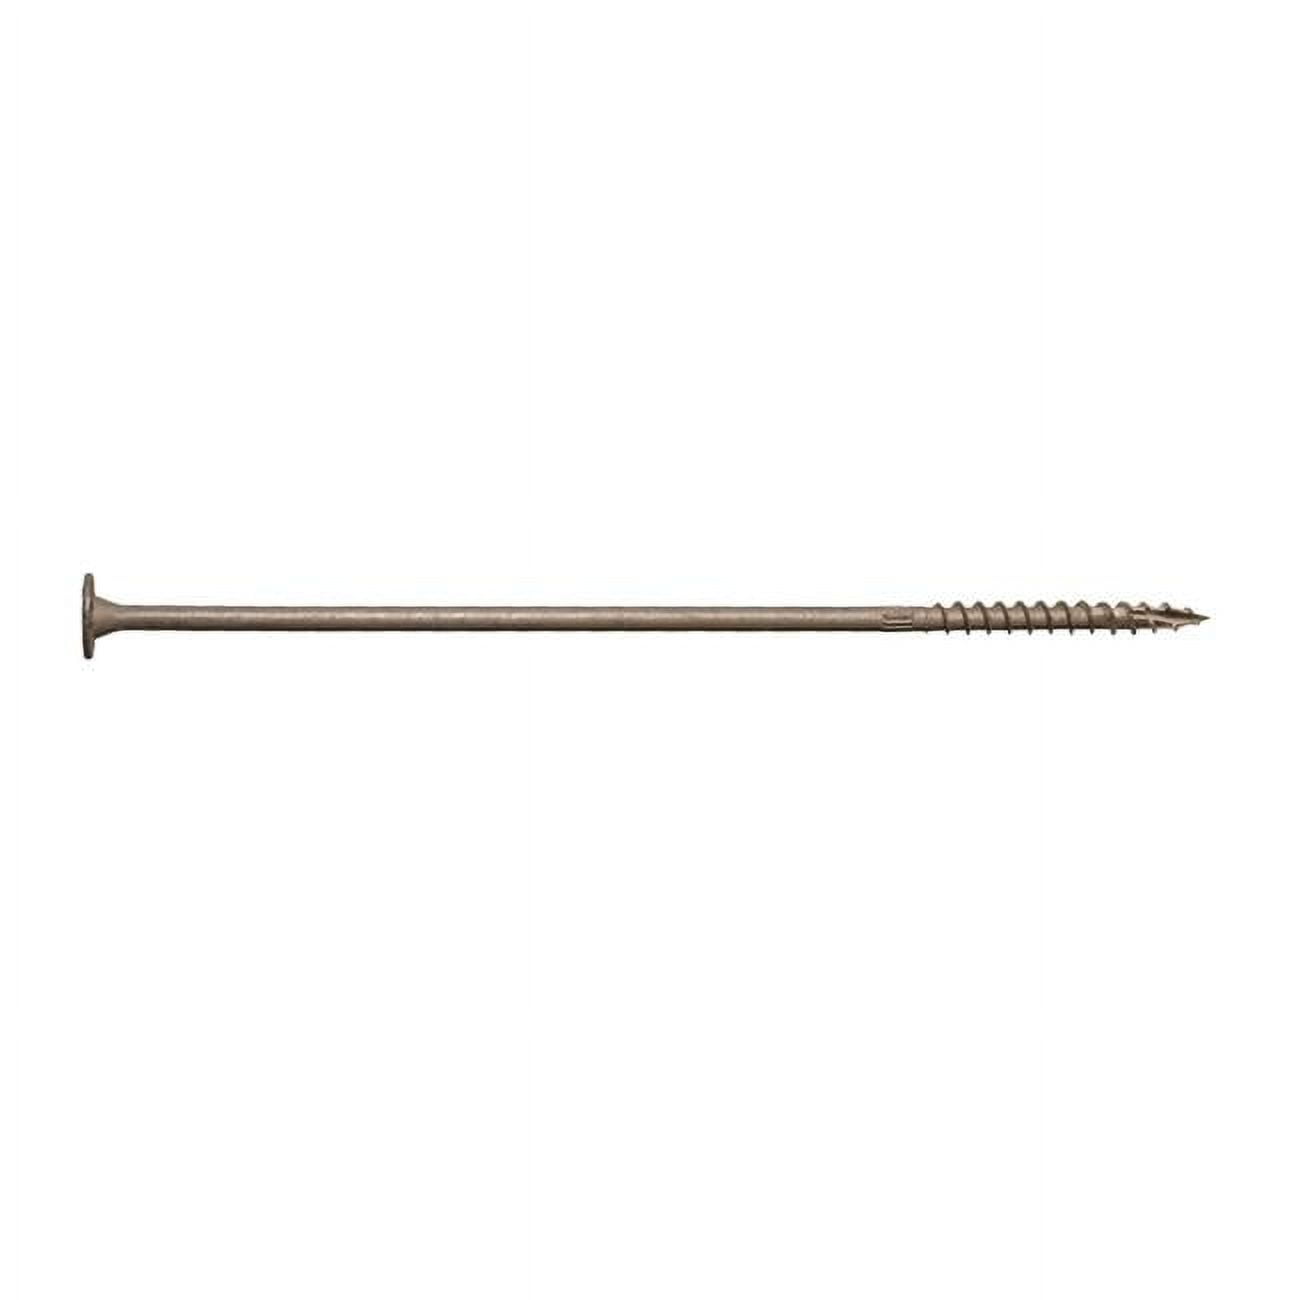 UPC 707392000112 product image for 5021104 Strong-Drive No.12 x 10 in. Star High Corrosion Resistant Wood Screws -  | upcitemdb.com